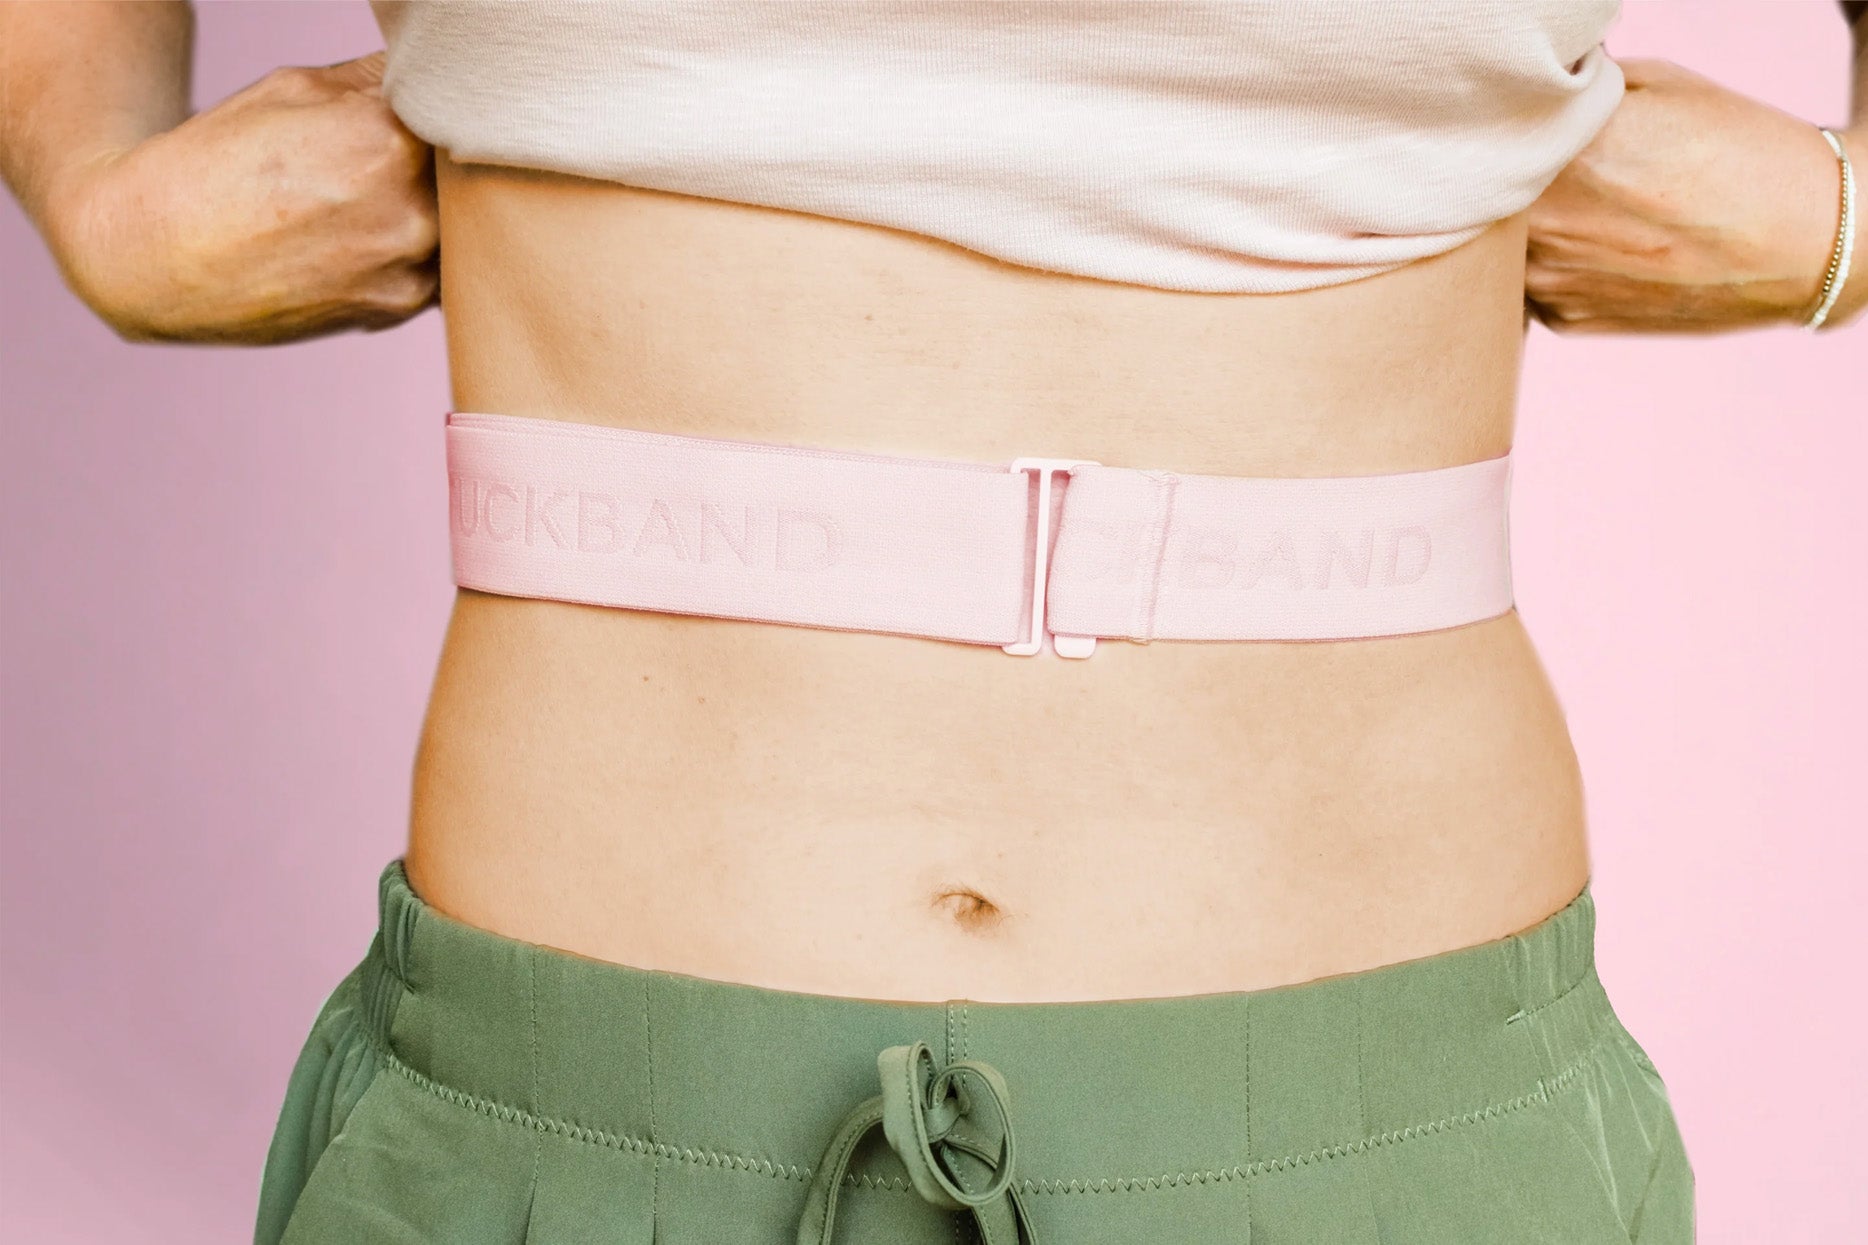 Tuckband Belt | Tuck your top where you want it – TuckBand